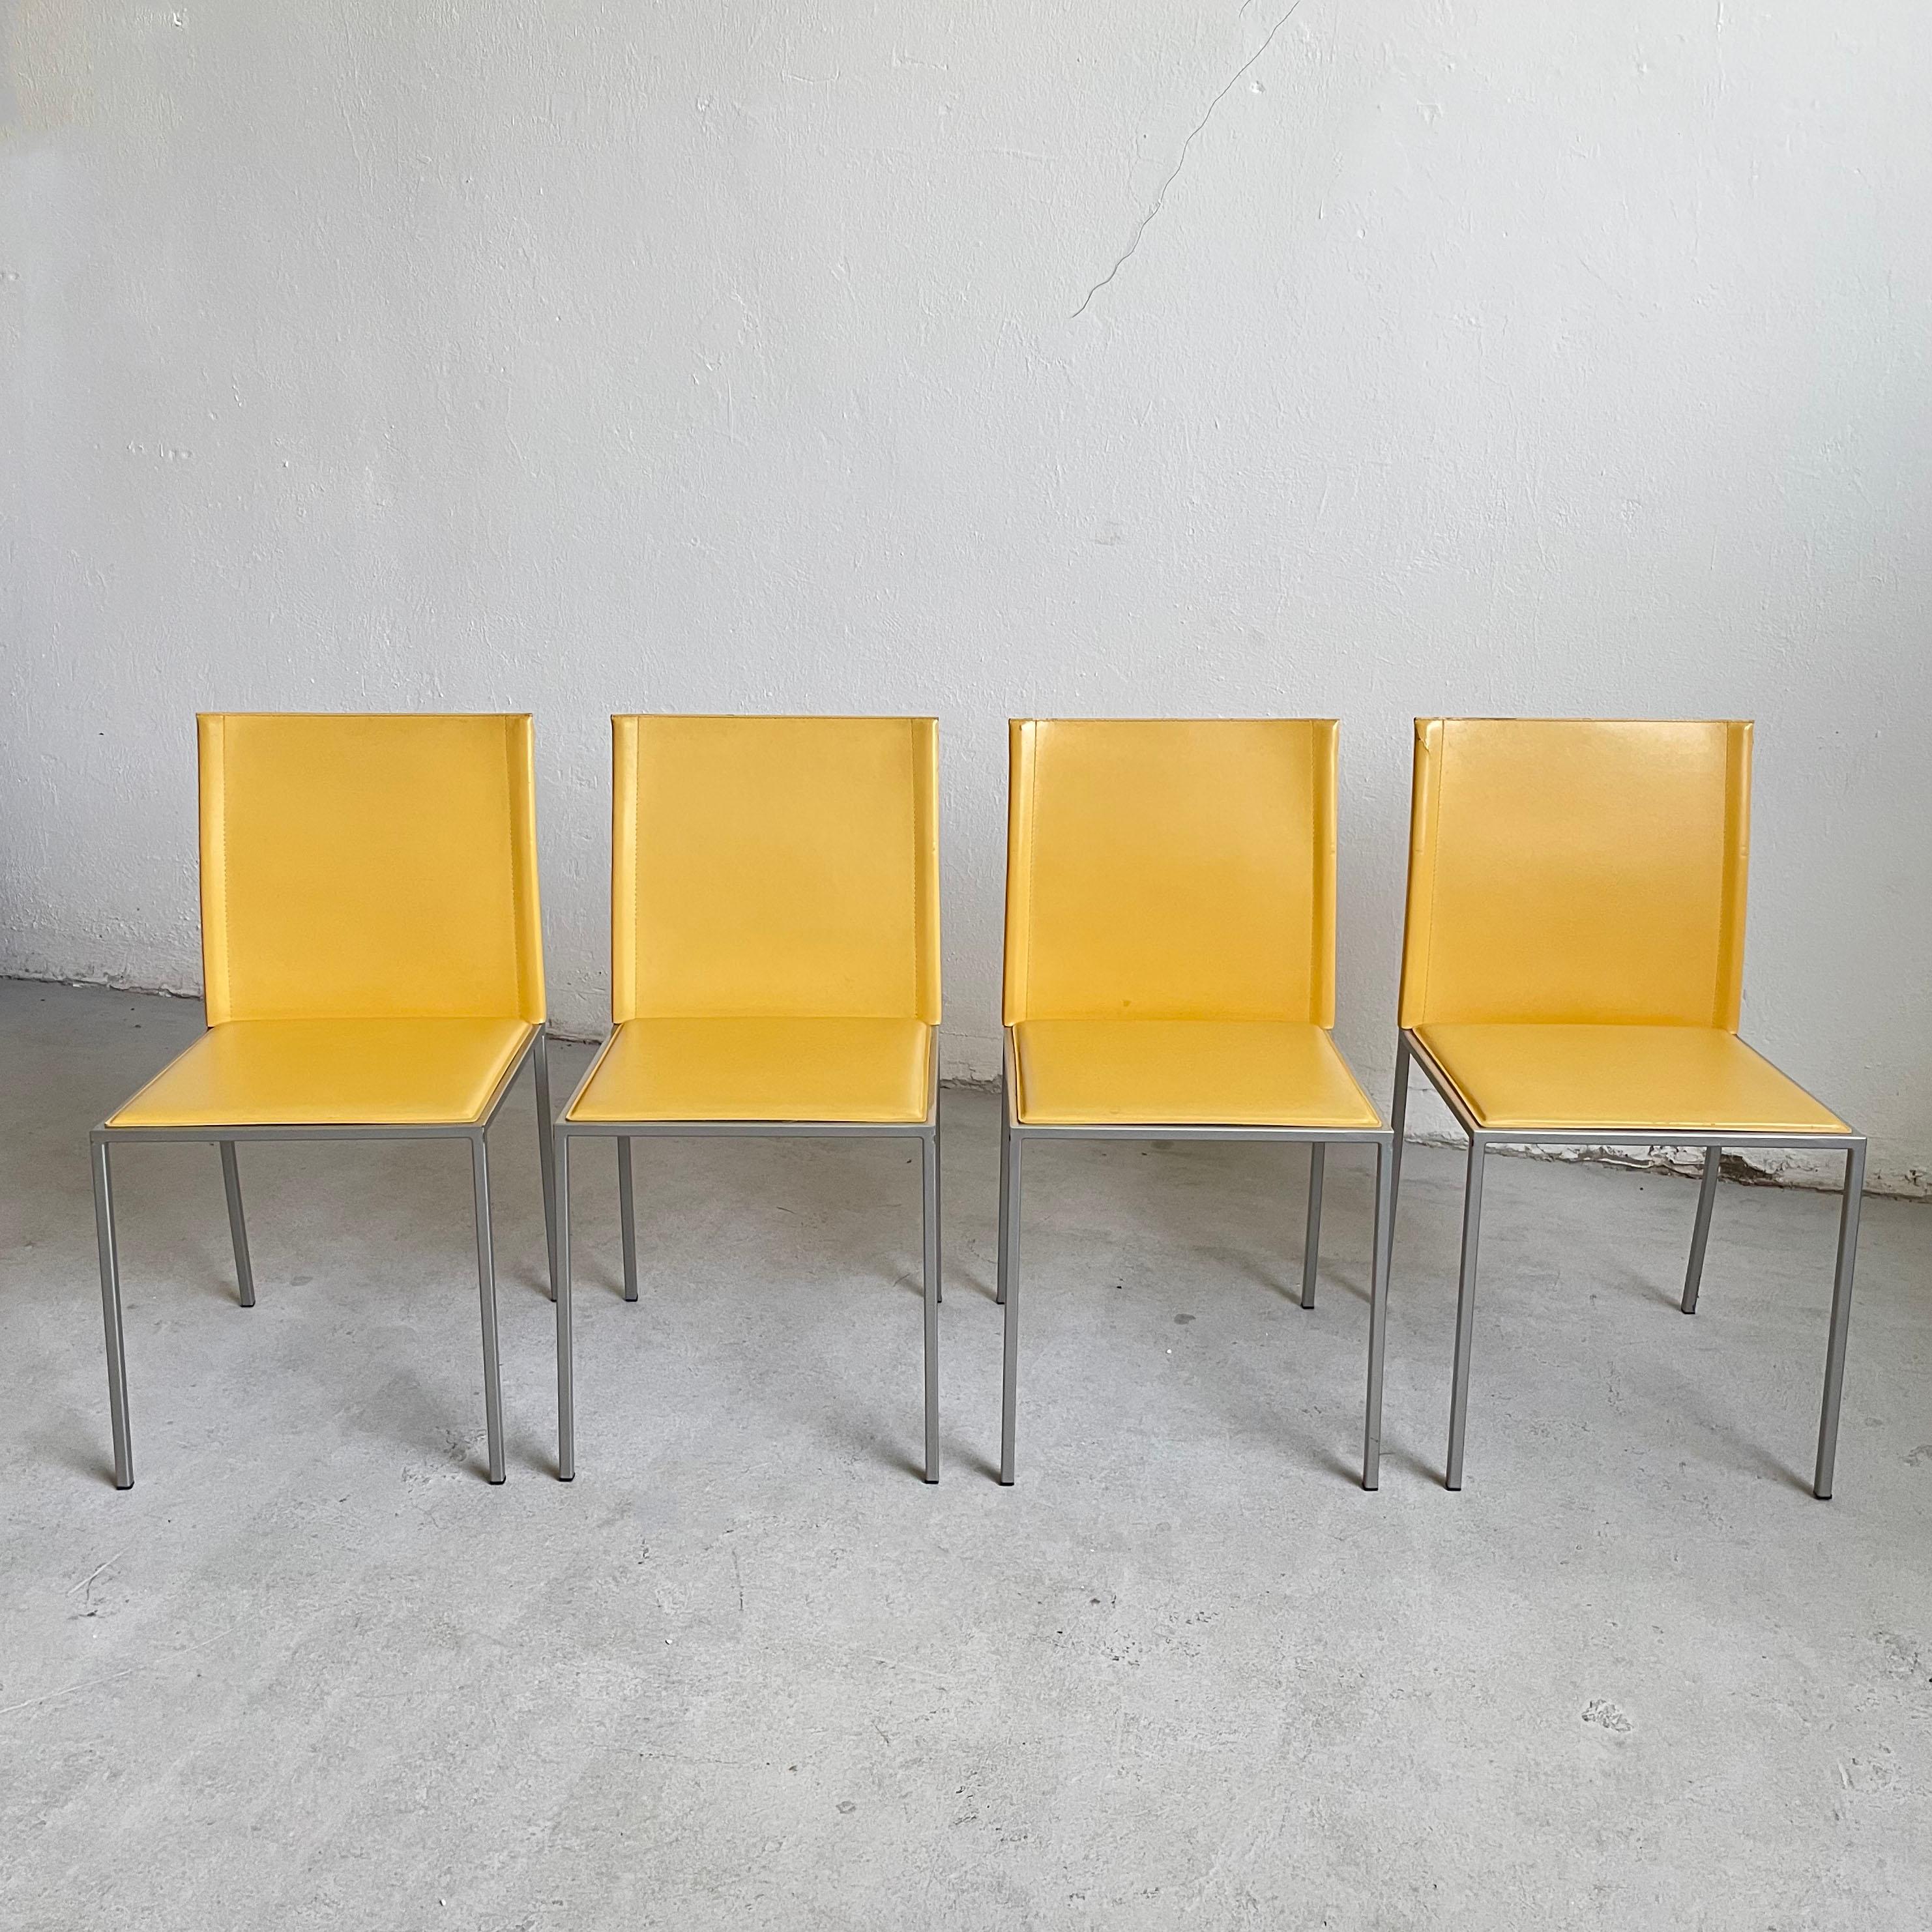 Set of 4 Italian Minimalist Modernist Leather Chairs by Calligaris, Italy 1990s In Good Condition For Sale In Zagreb, HR